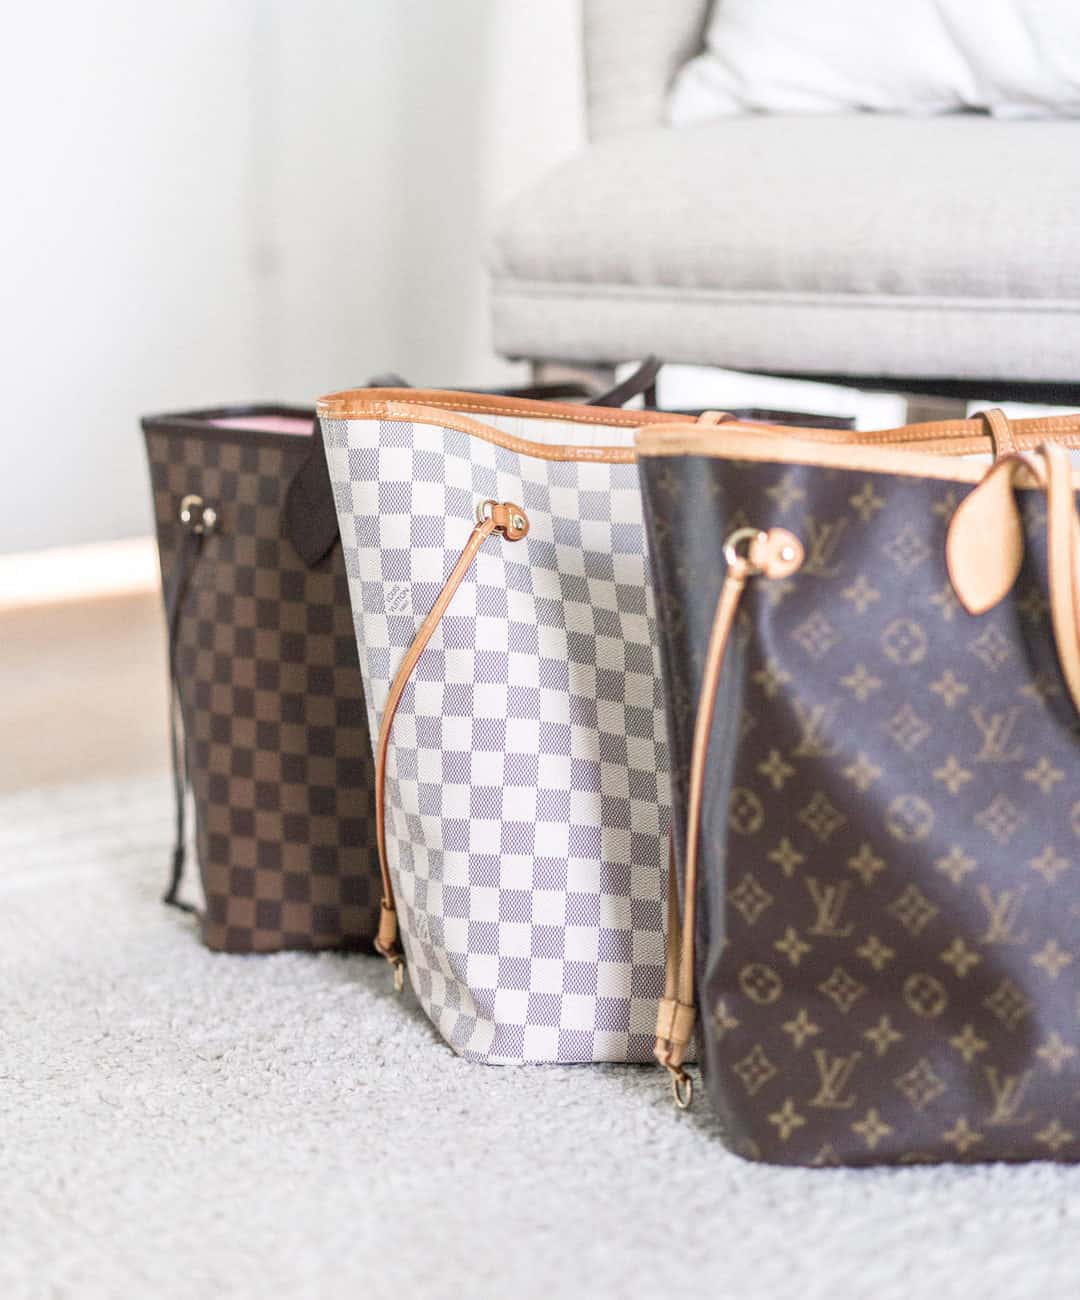 how can you tell an authentic louis vuitton bag